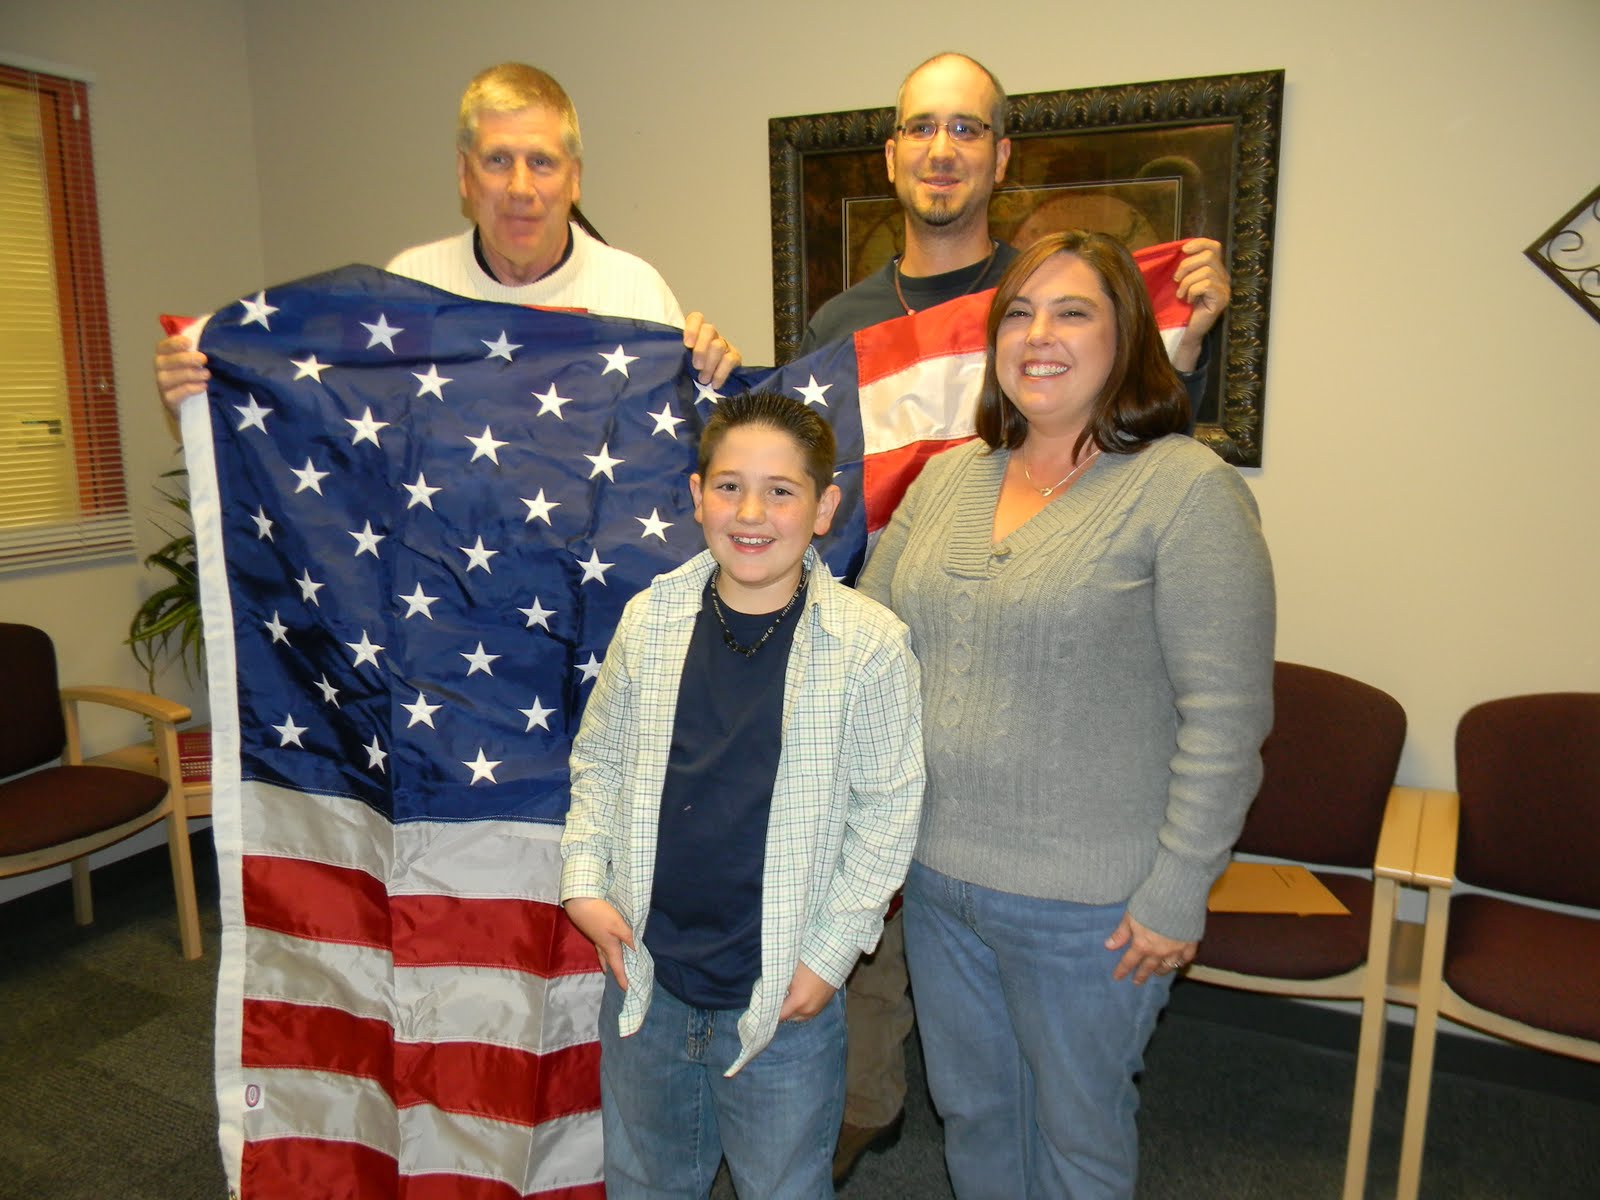 Tuesday, Rep. Larry Kissell (NC-08) presented an American flag that had flown over the united States Capitol to Aquadale Elementary School 5th grader Benjamin Smith.